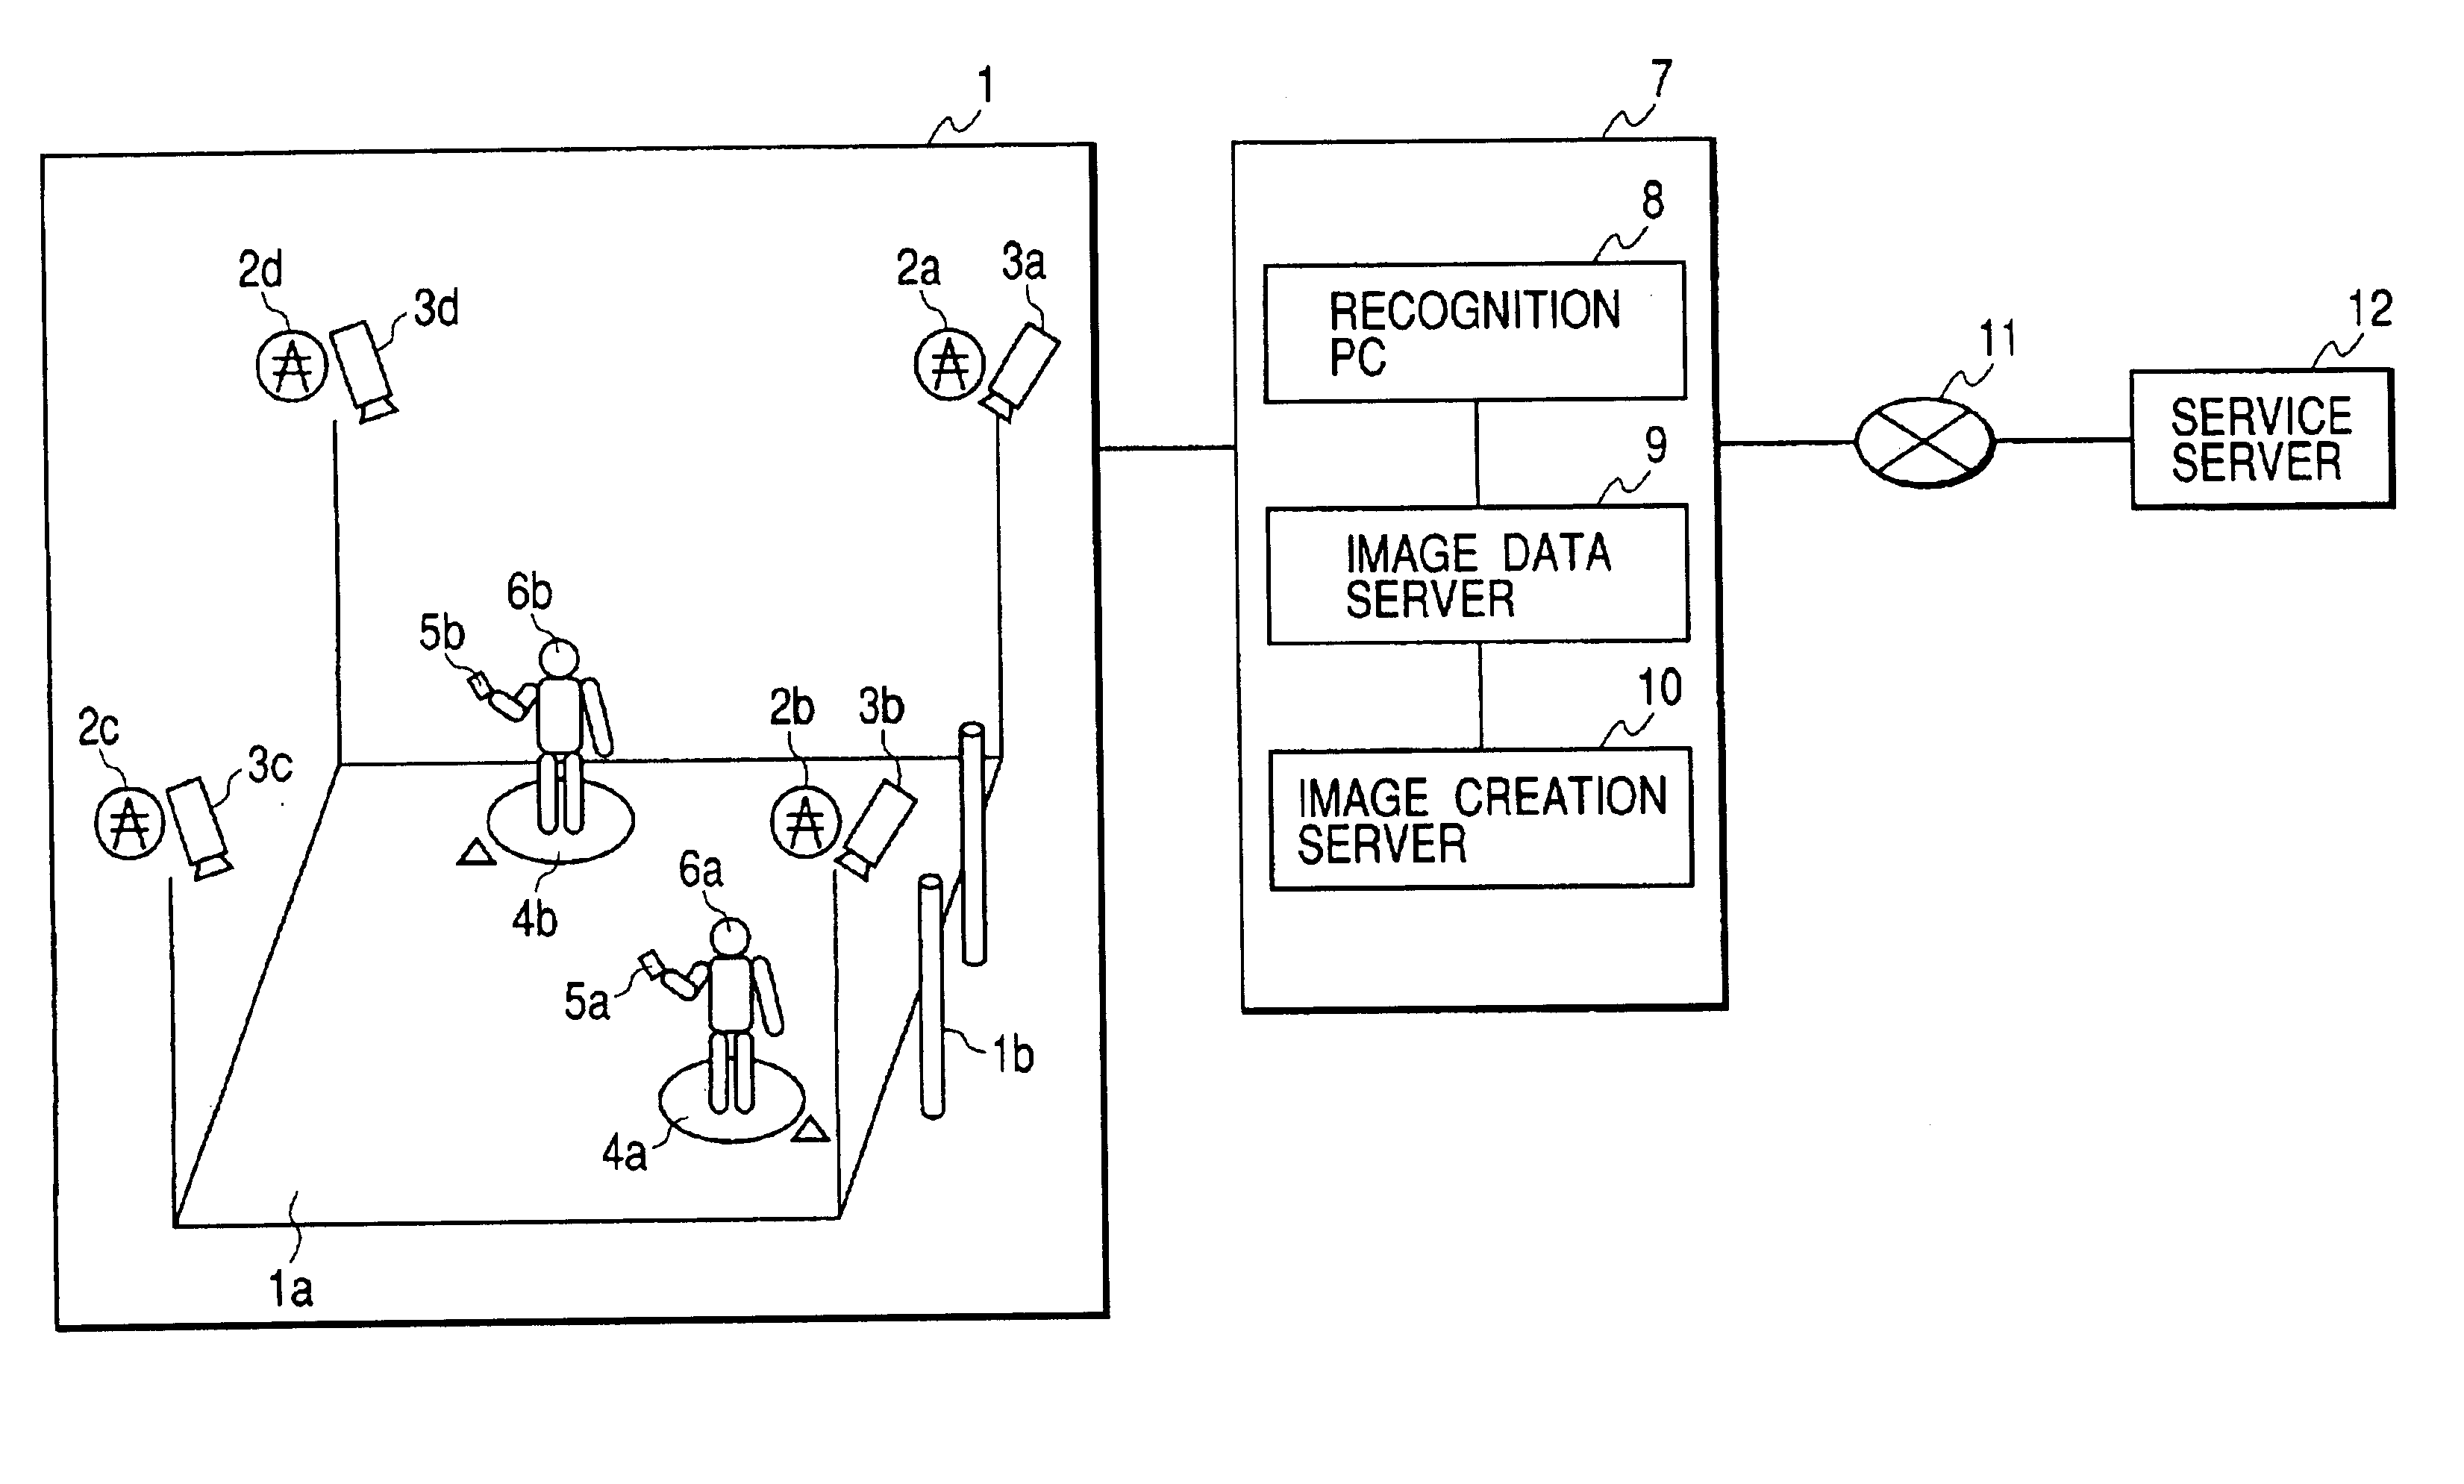 Method and system for displaying guidance information